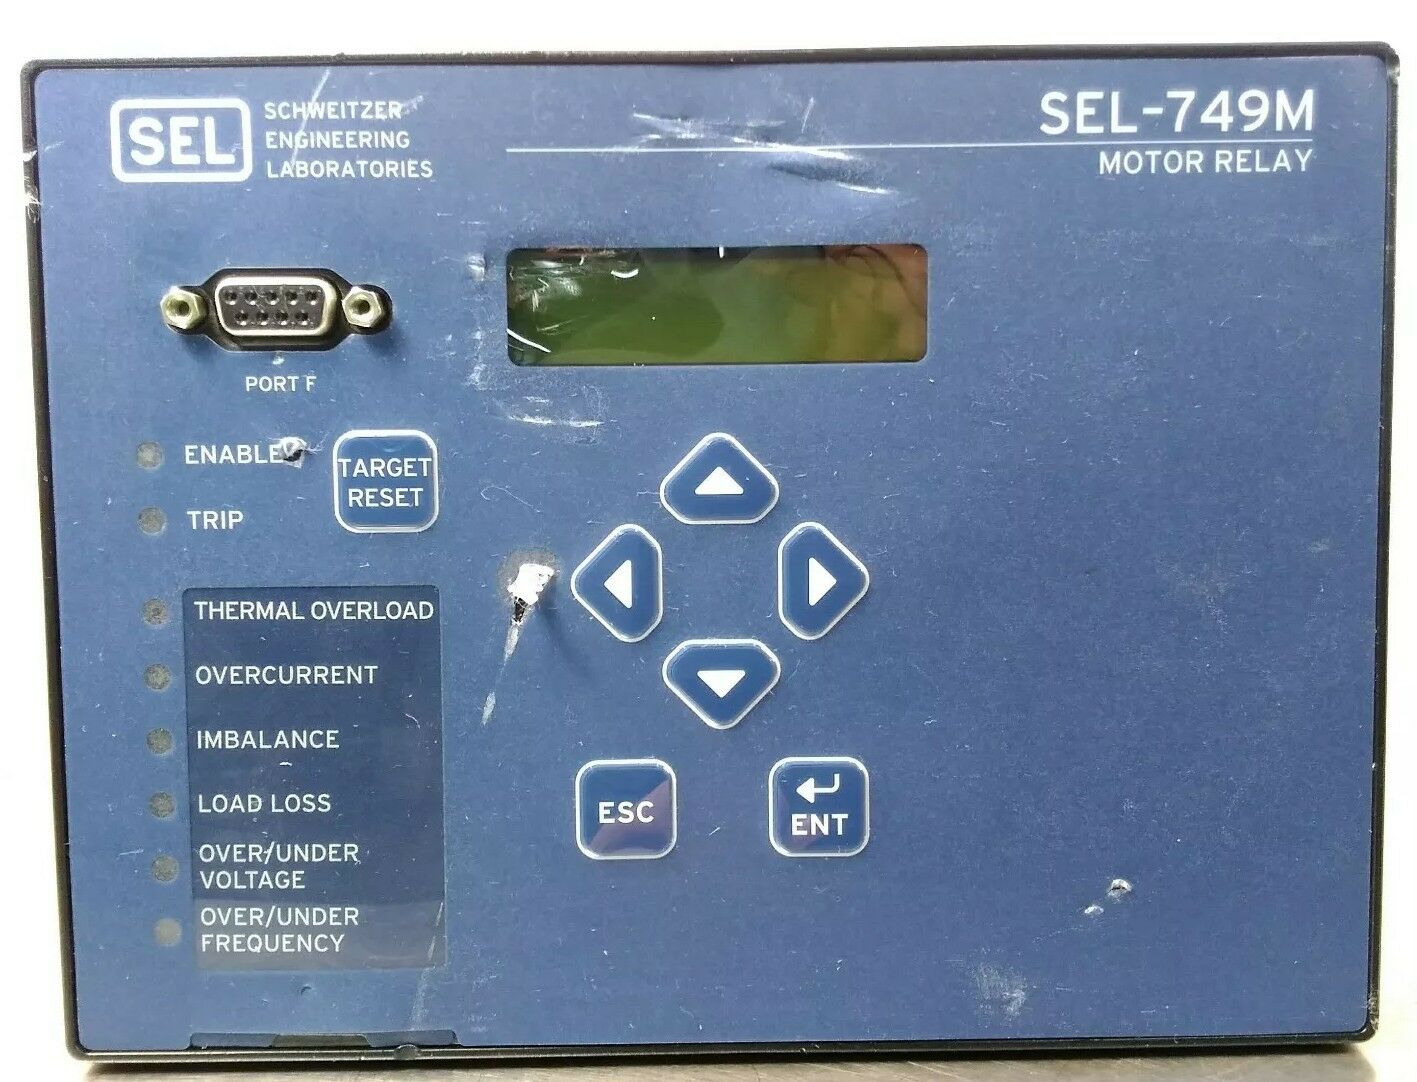 SEL SEL-749M 0749M01A500X1A11 MOTOR RELAY    1D